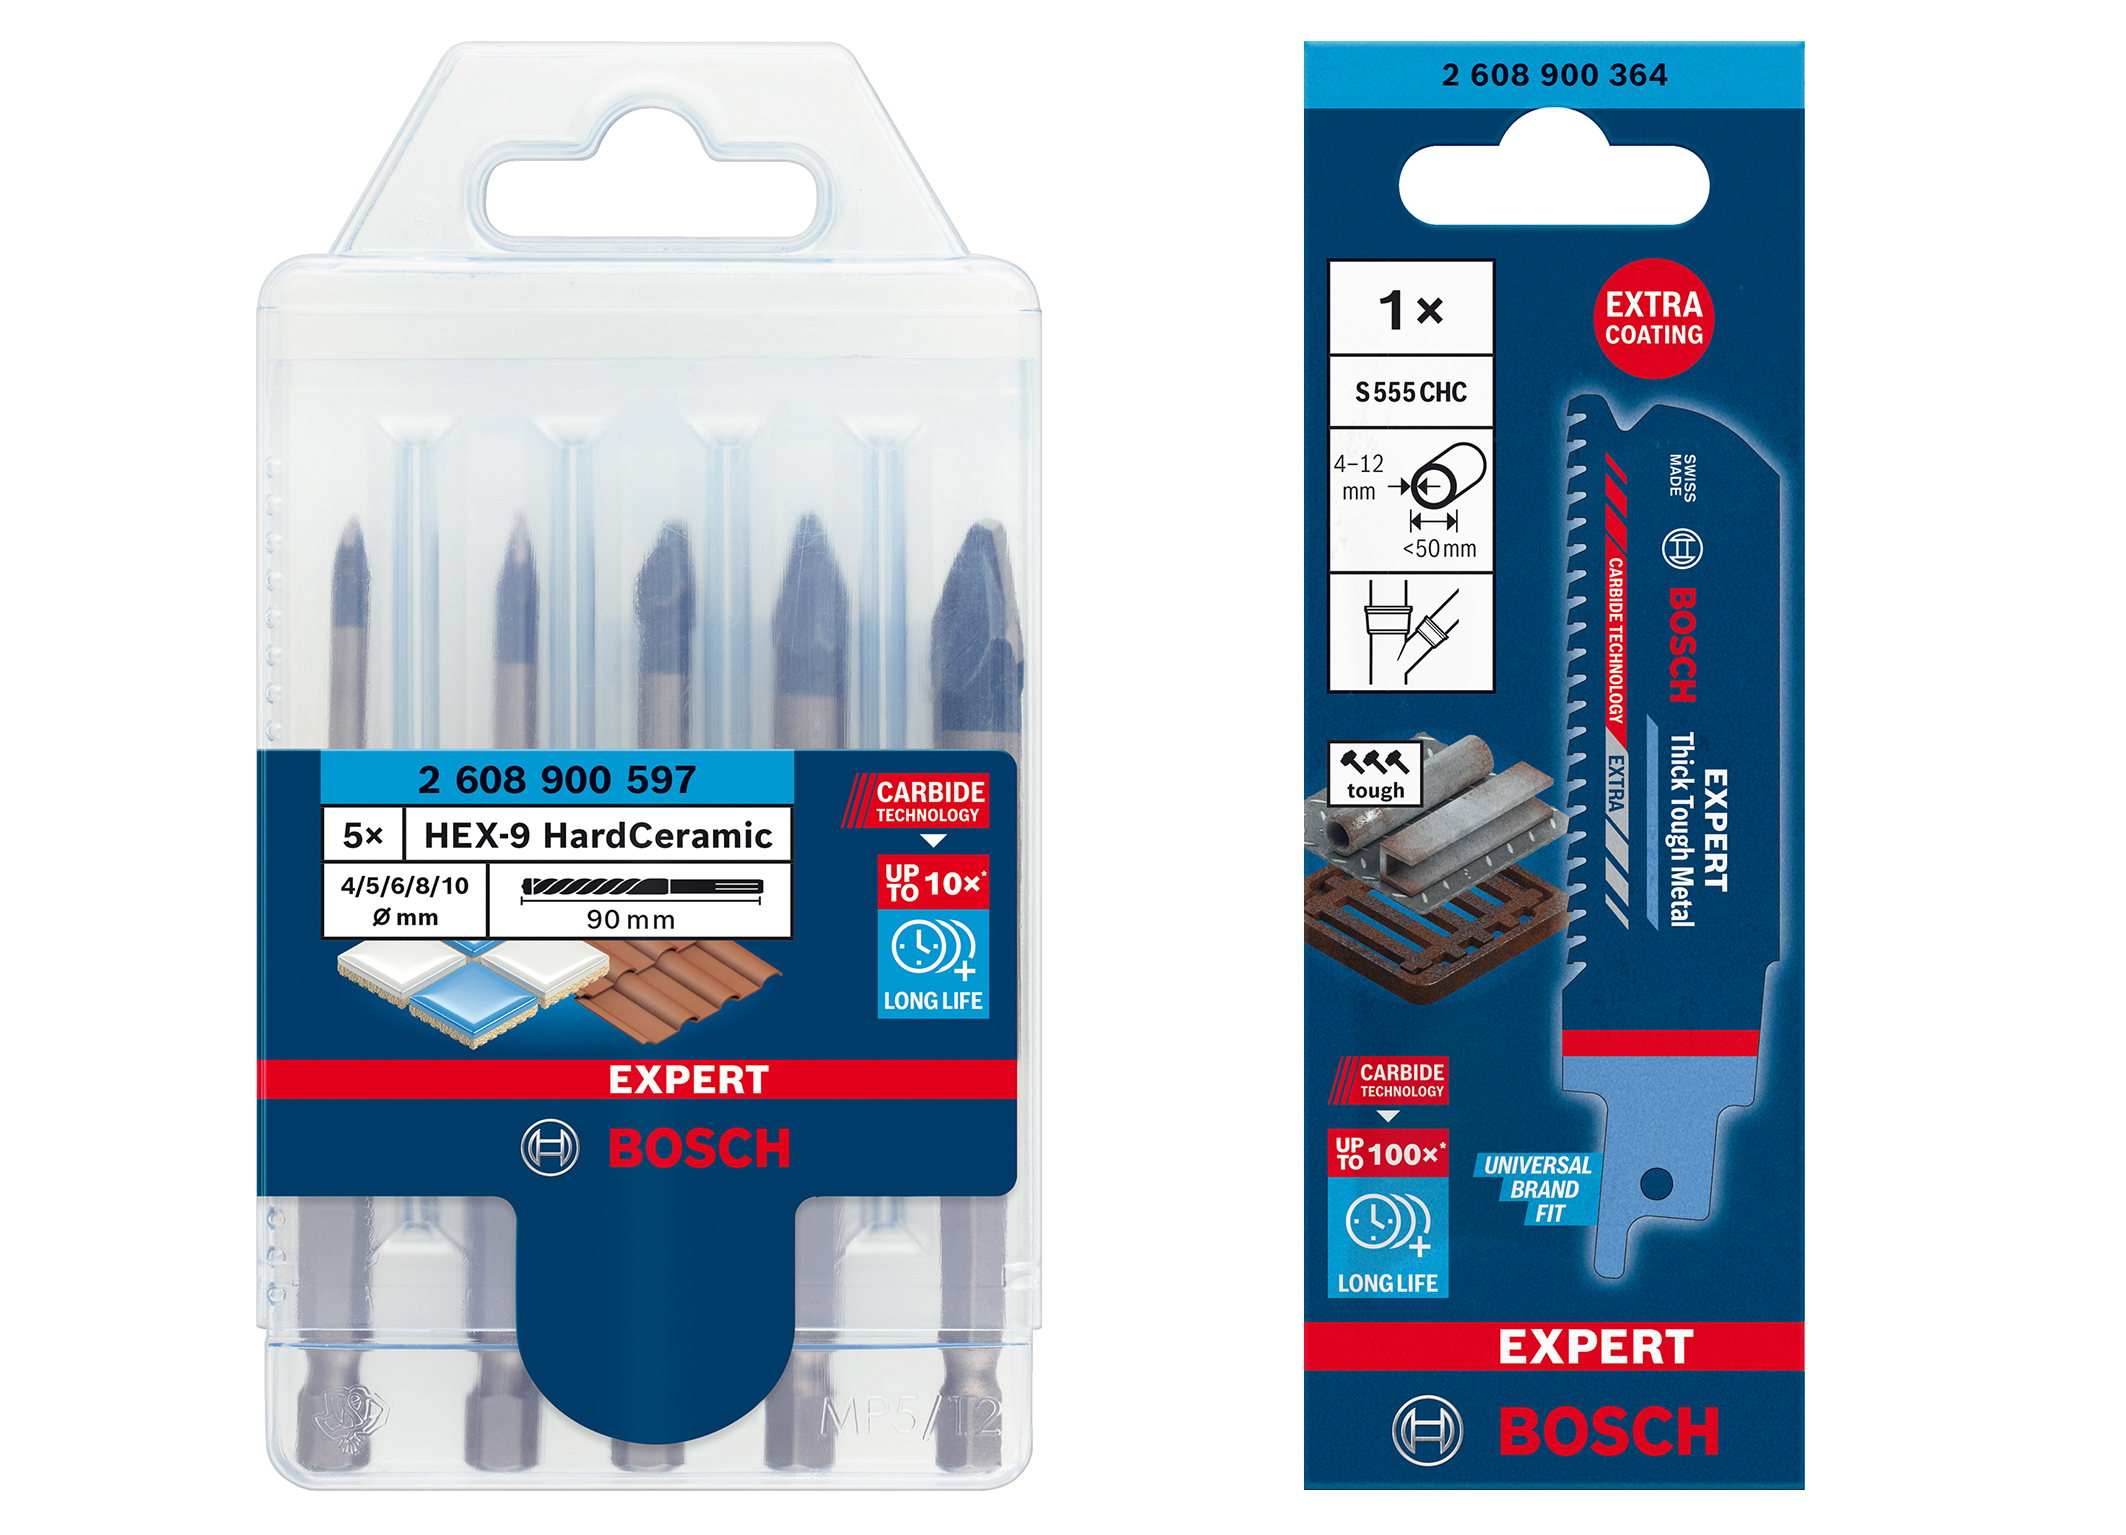 The best accessories in the range at a glance: New Expert line from Bosch for professionals